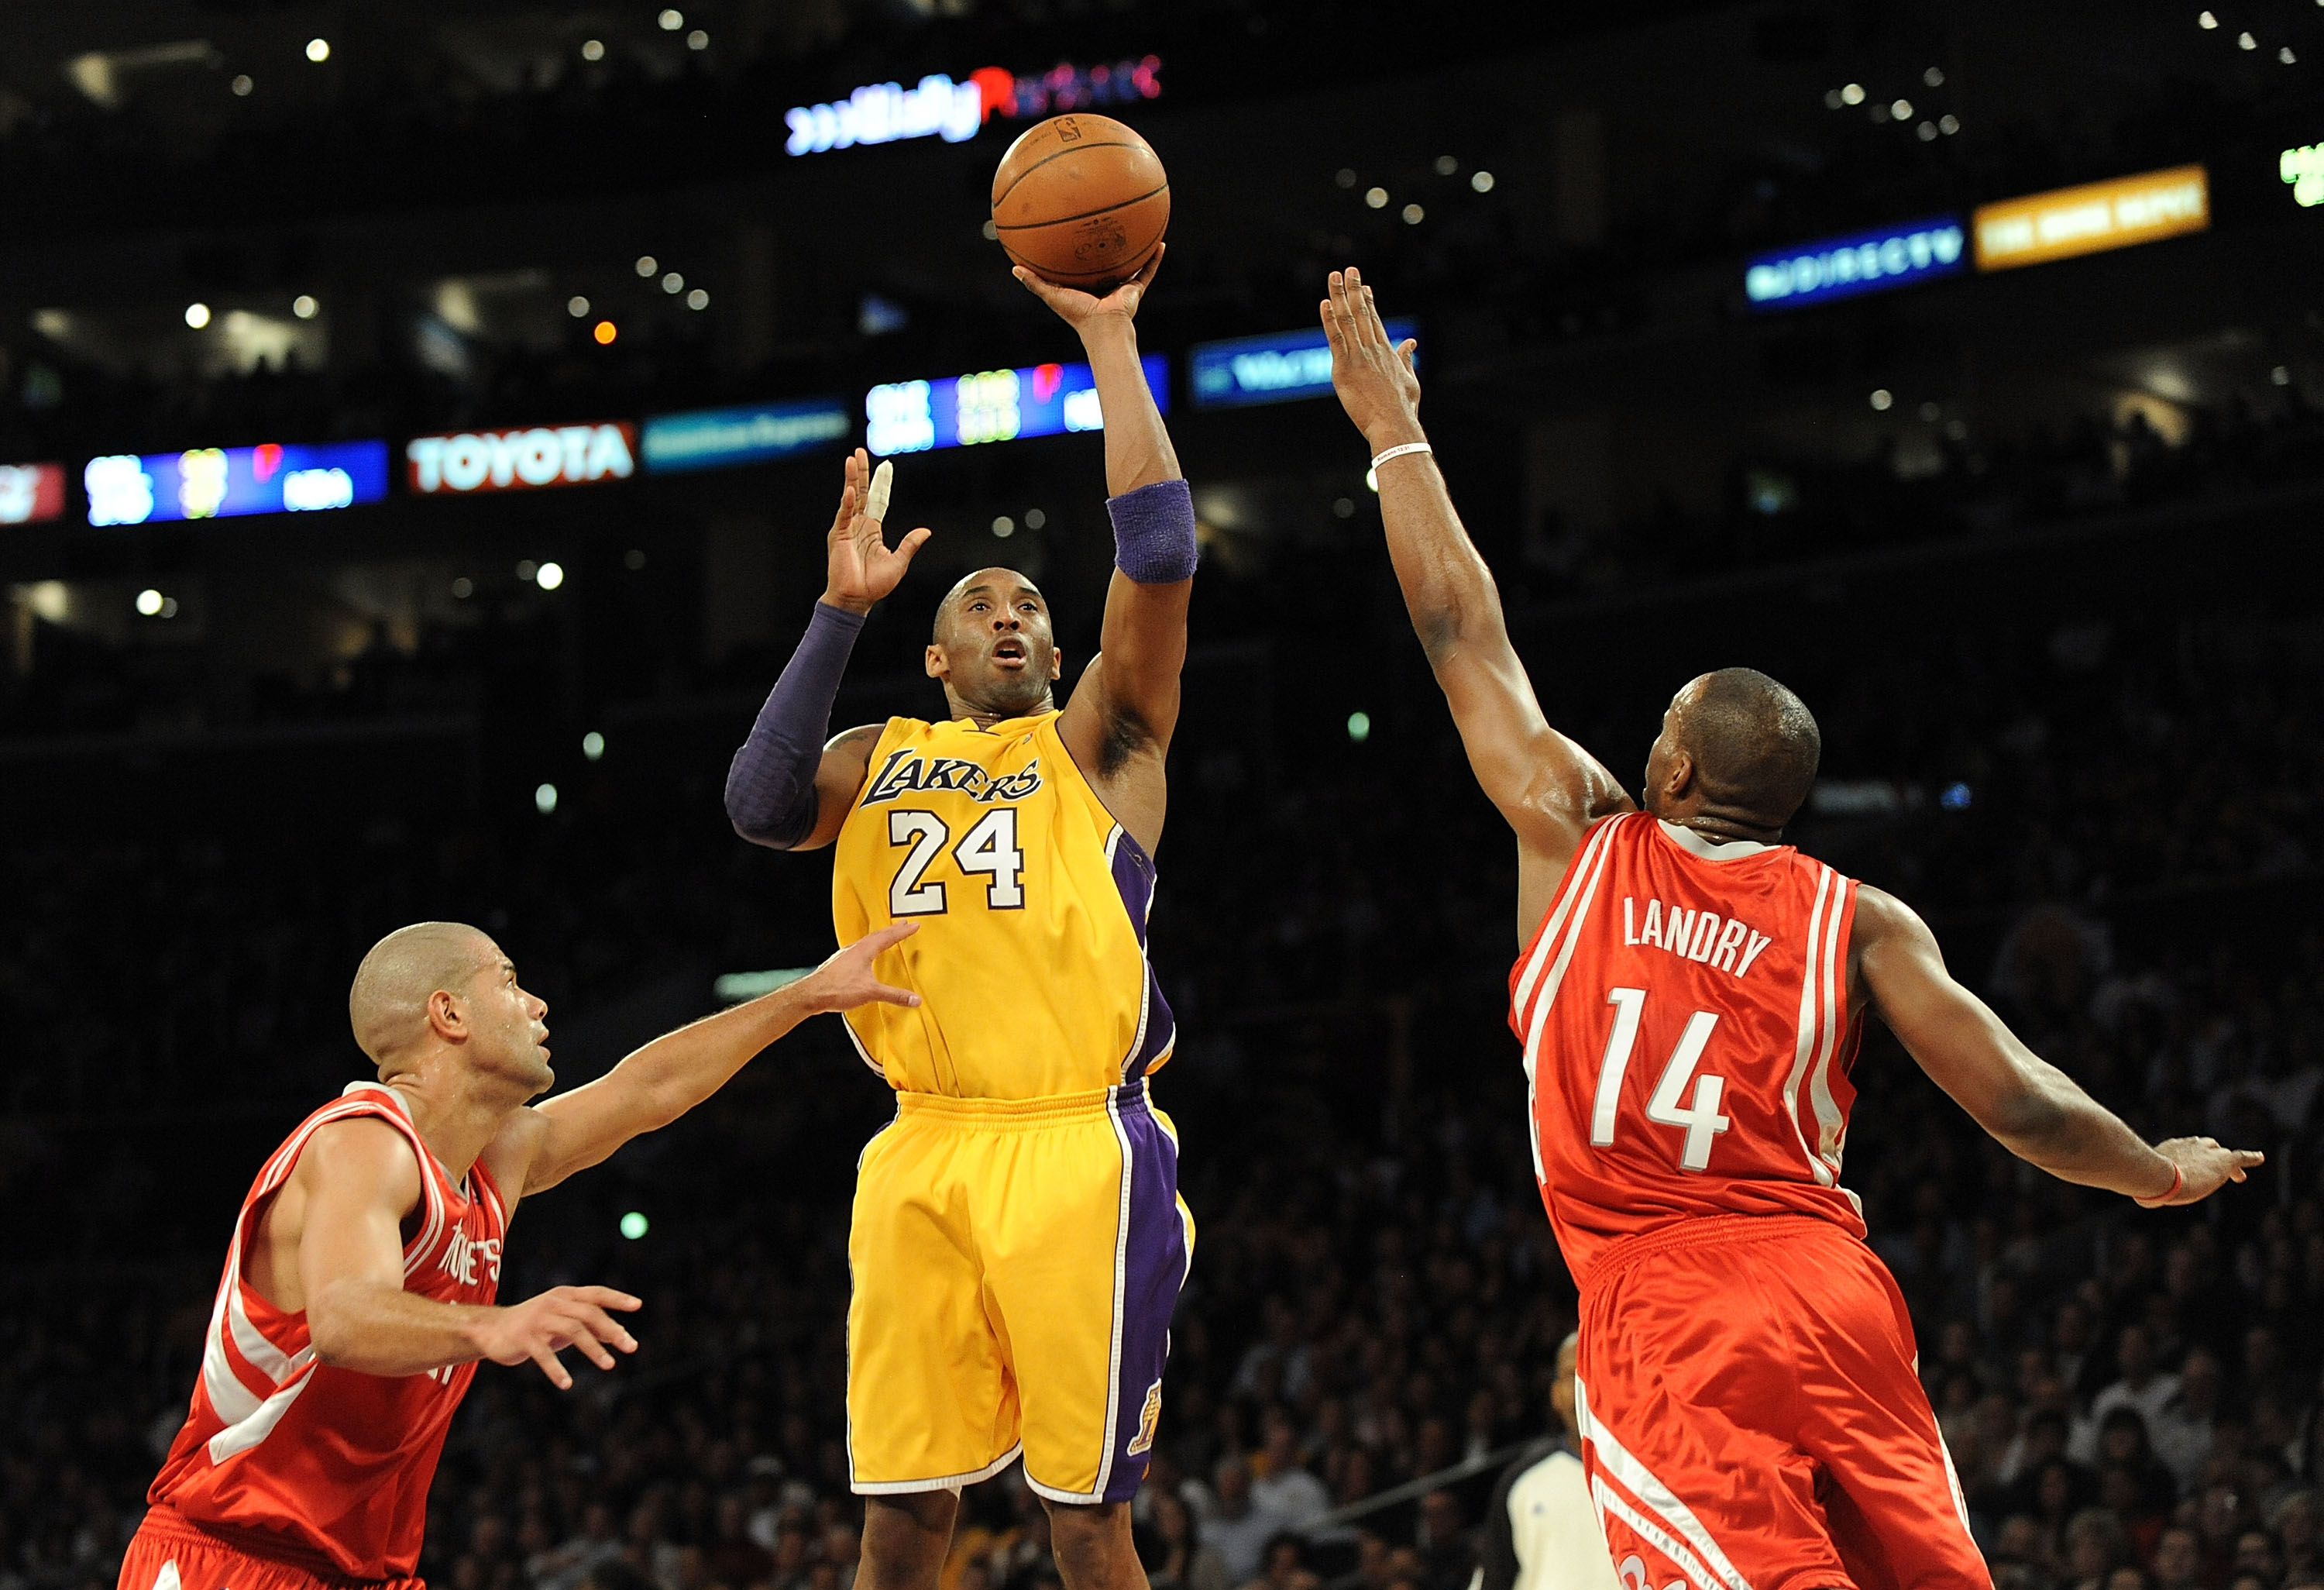 Kobe Bryant shooting a jump shot over two defenders